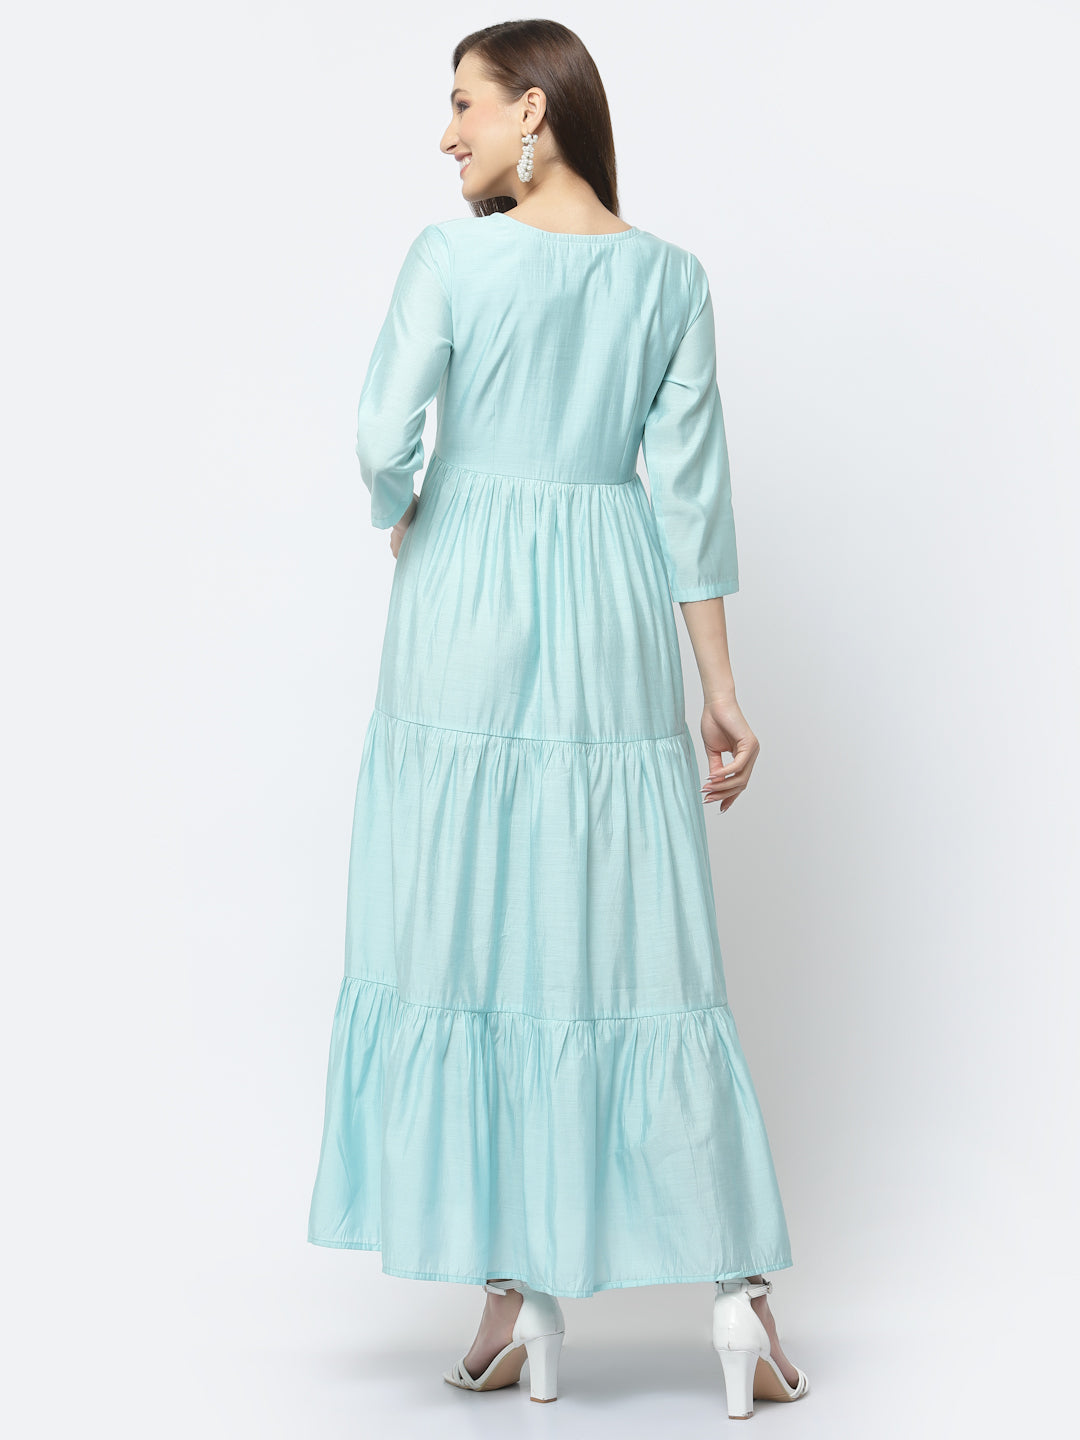 Pale Blue Lily Maxi Dress with All Over Embroidery and Lace Detailing, Side Pockets - ARH1480